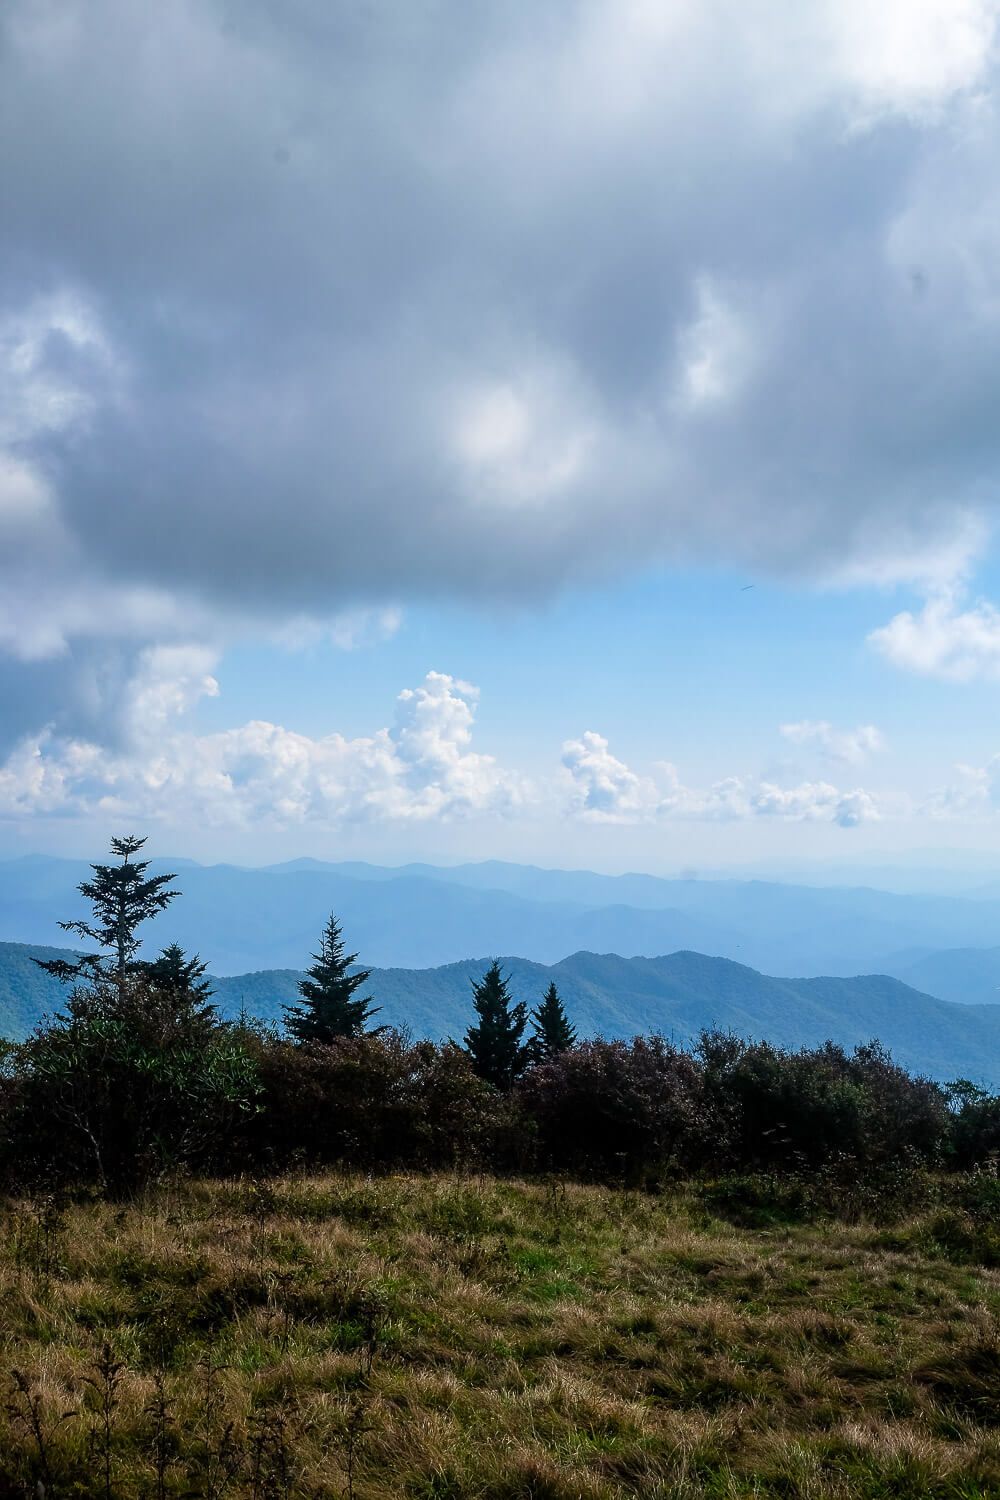 Andrews Bald Hike - Great Smoky Mountains National Park